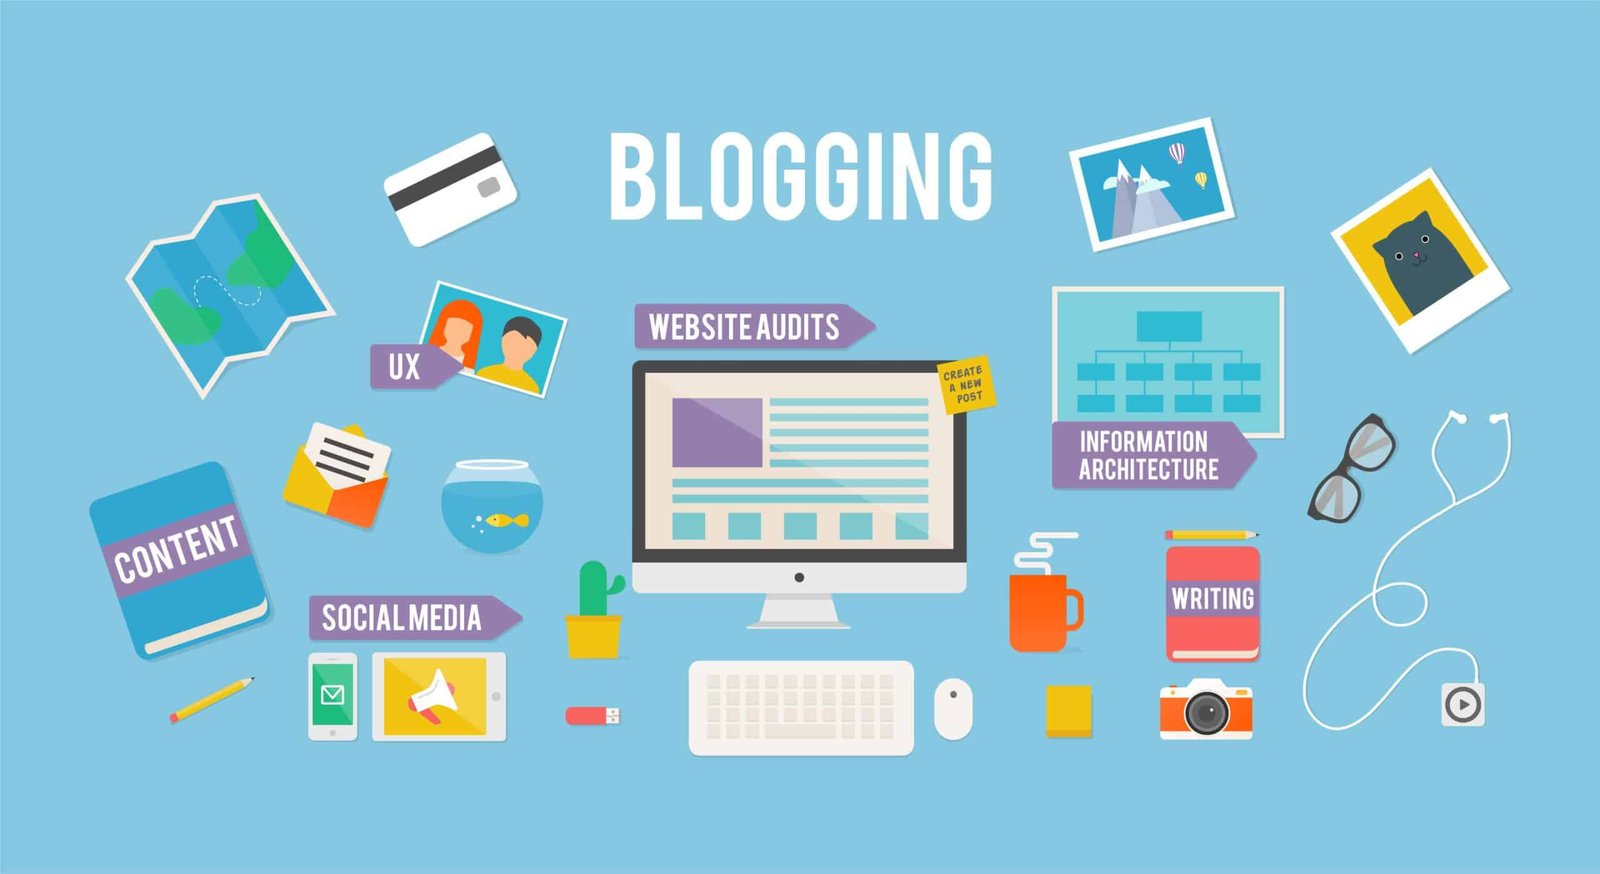 How to Begin Creating a Blog? 8 Tips for Beginners